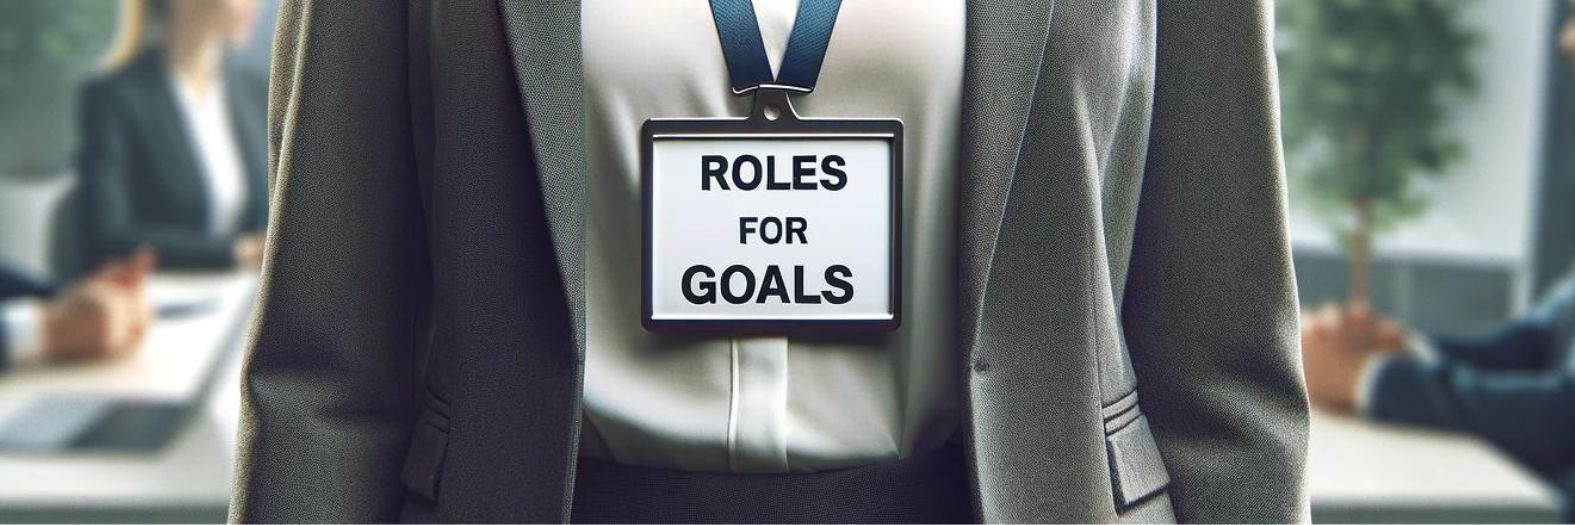 business woman wearing a lanyard that says "ROLES FOR GOALS"